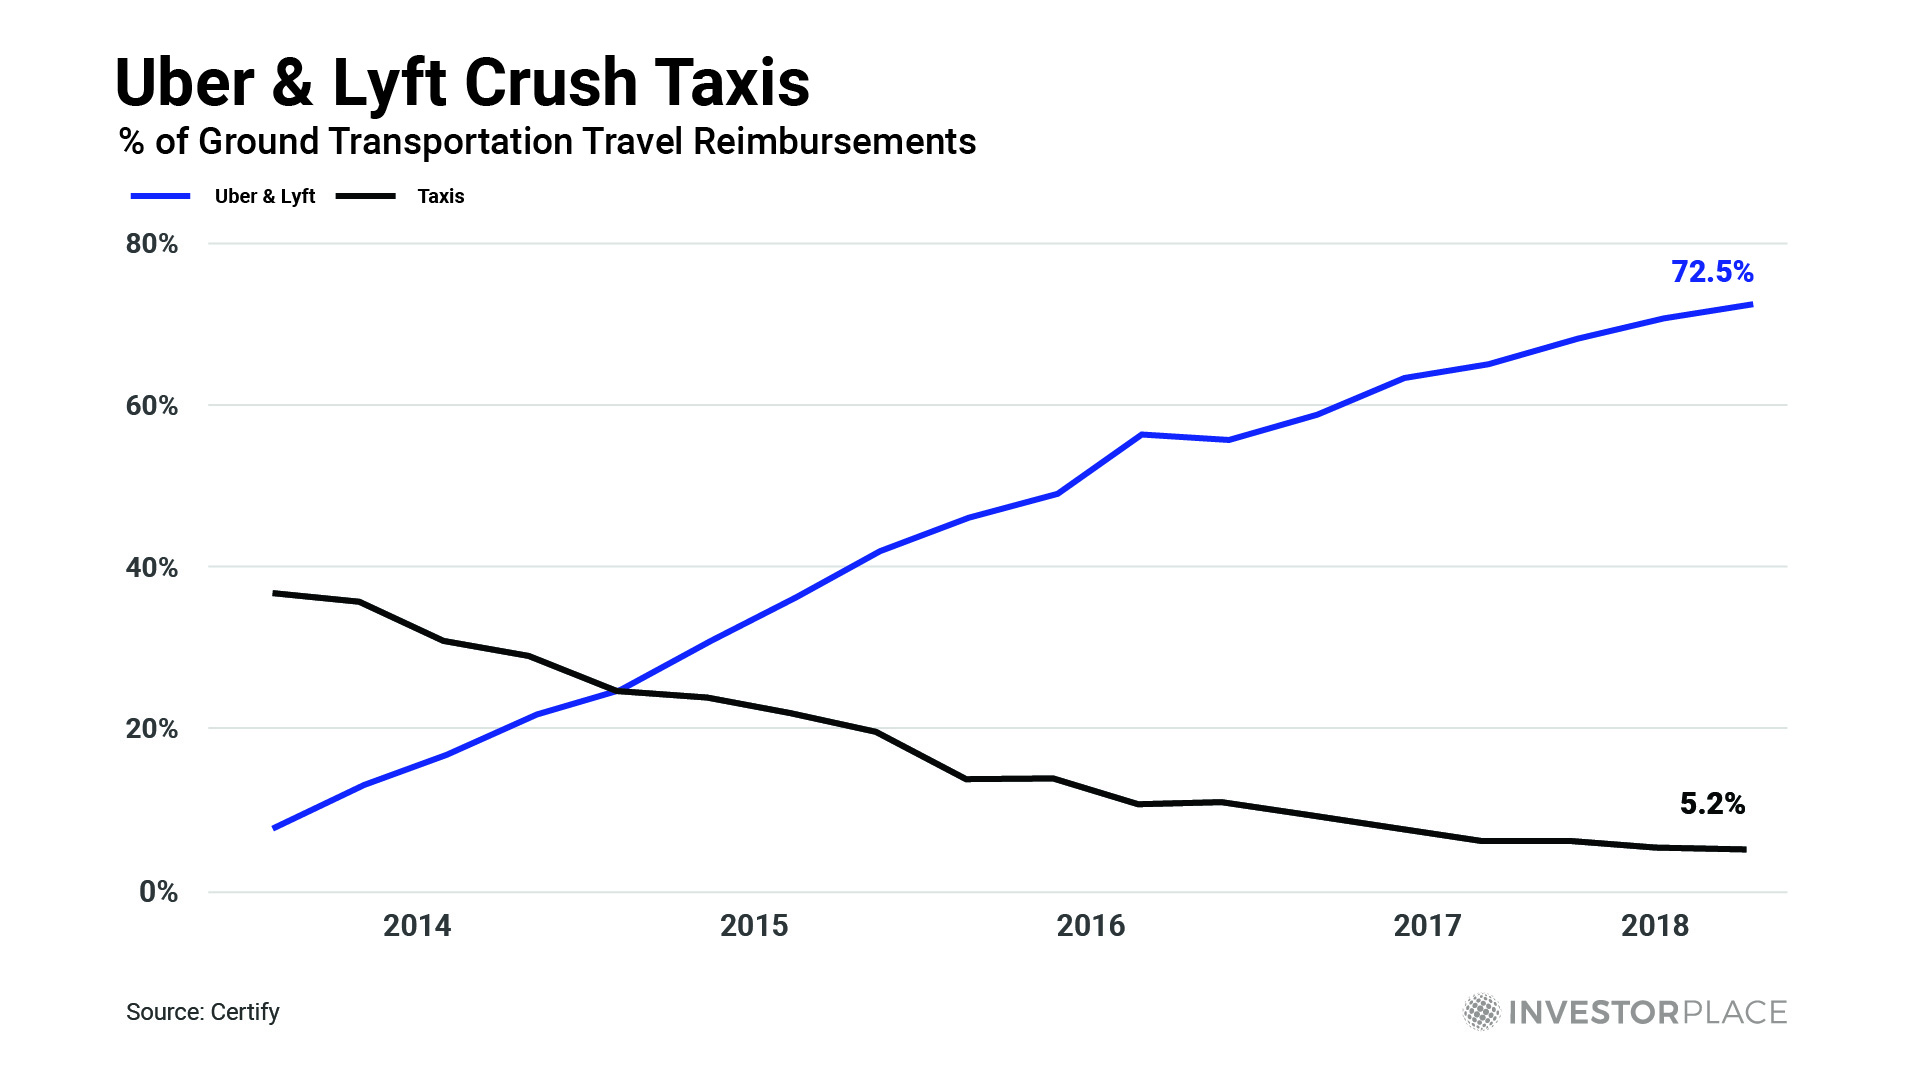 Image of Uber and Lyft versus taxicabs.